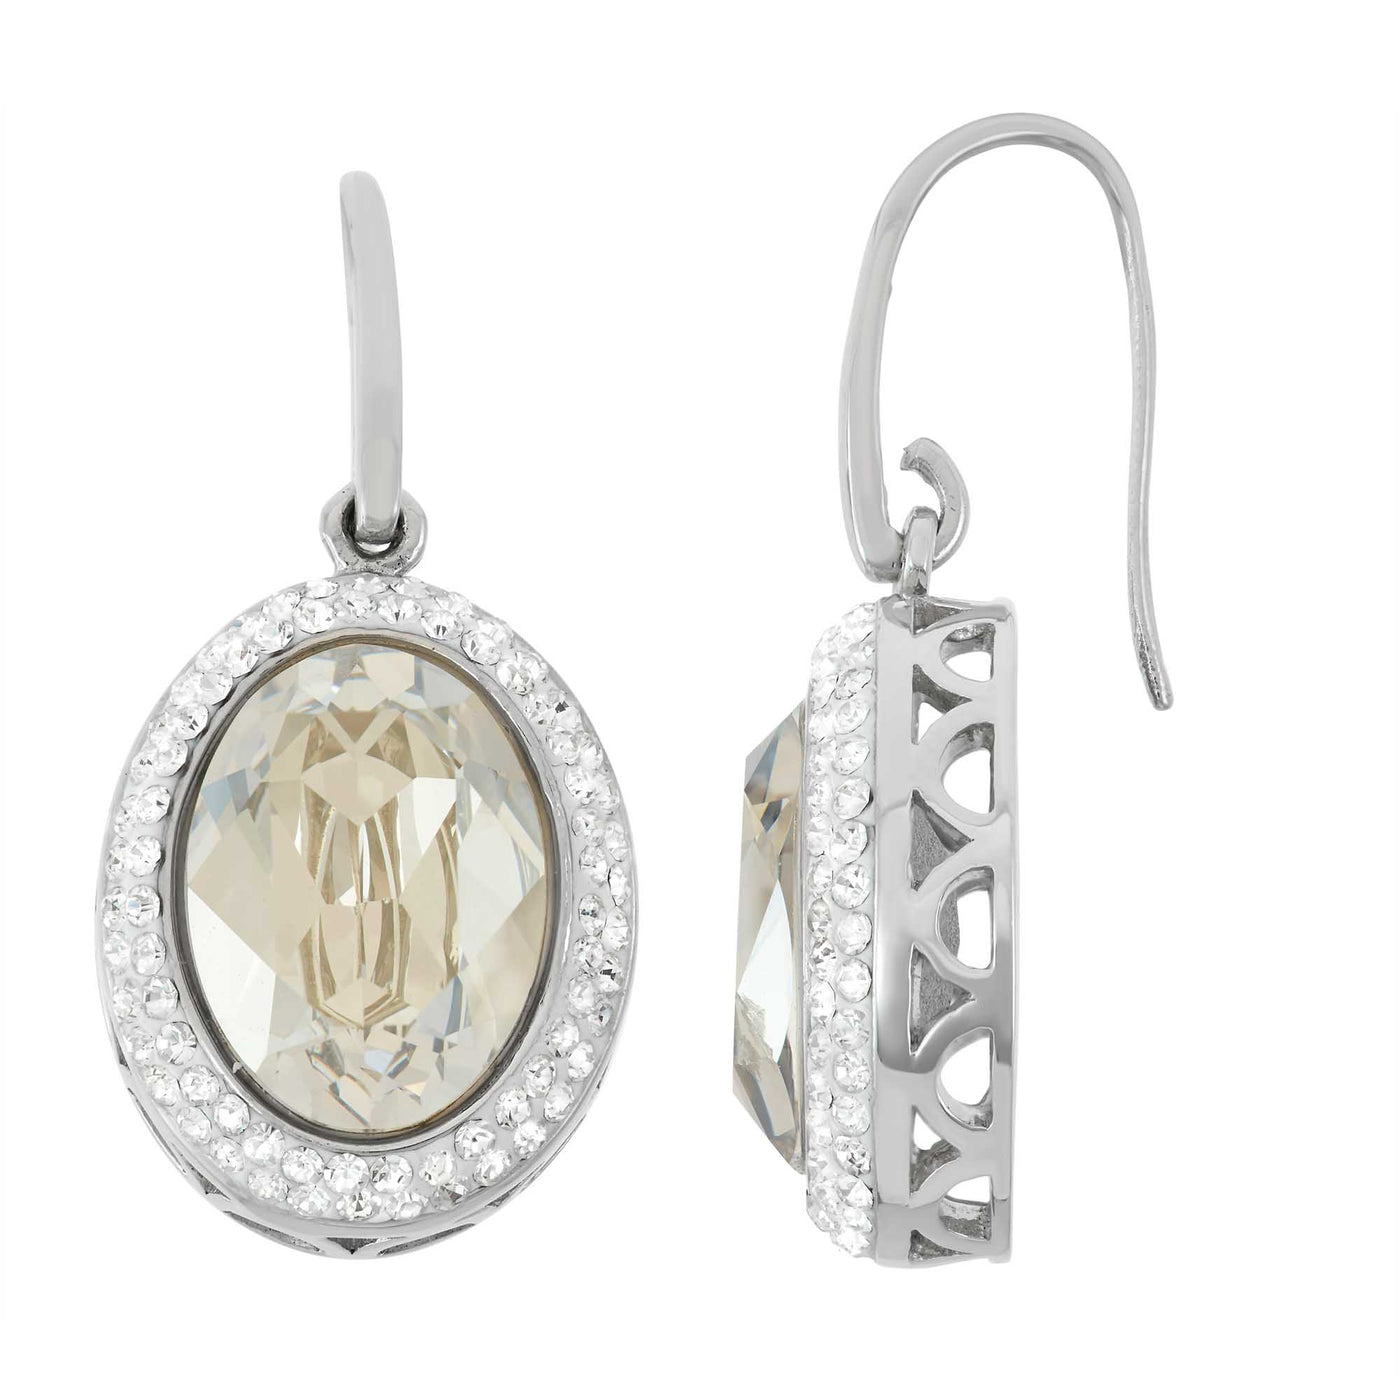 Rebecca Sloane Silver Oval Earring With Clear And Shade Crystals